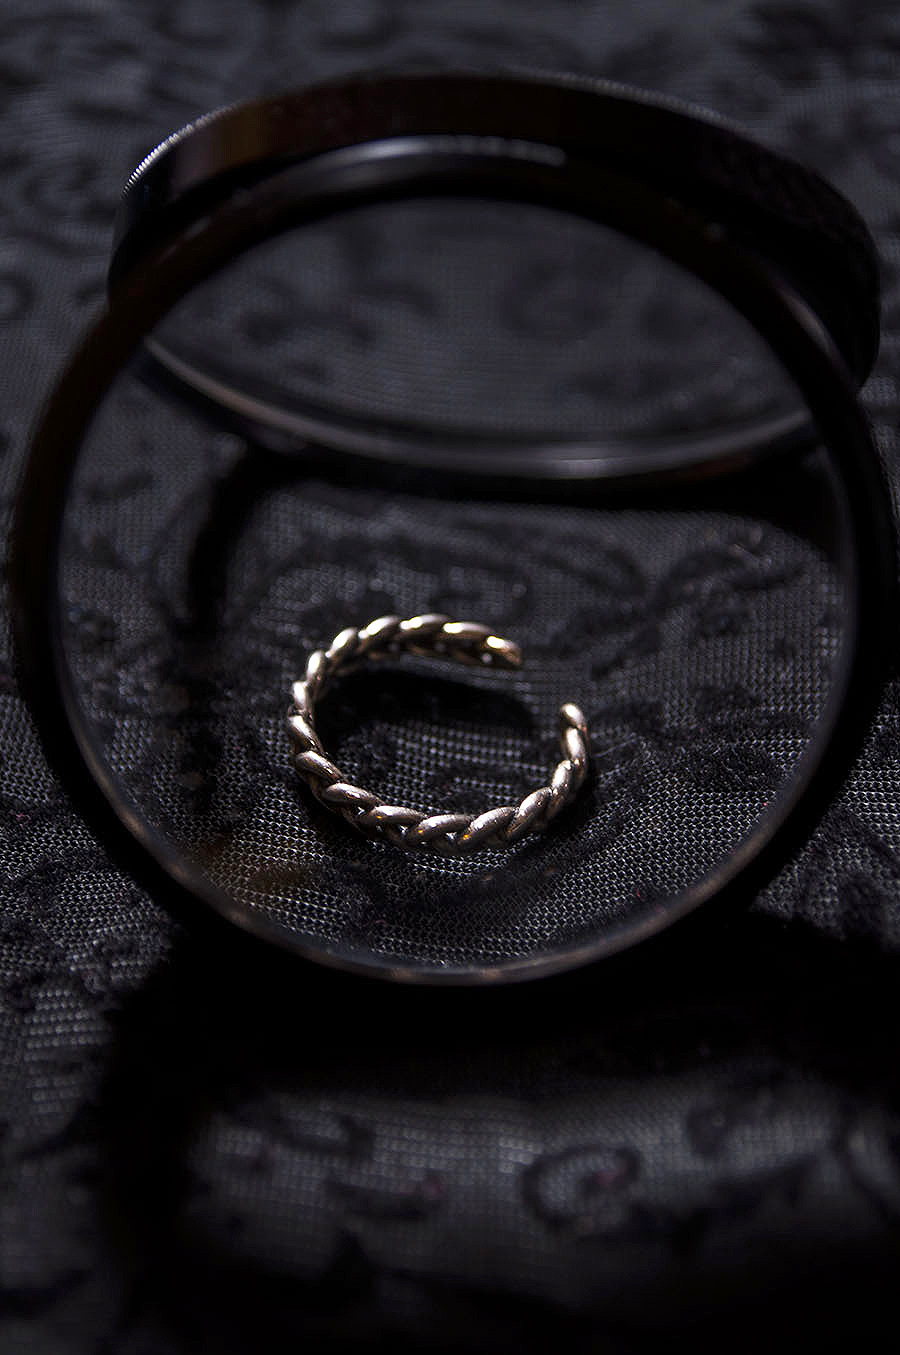 Rebecca_Huang_still_life_photography_dark_velvet_accessories_rings_jewelry_lens_magnifying_reflection_silver_braided_weaved_floral